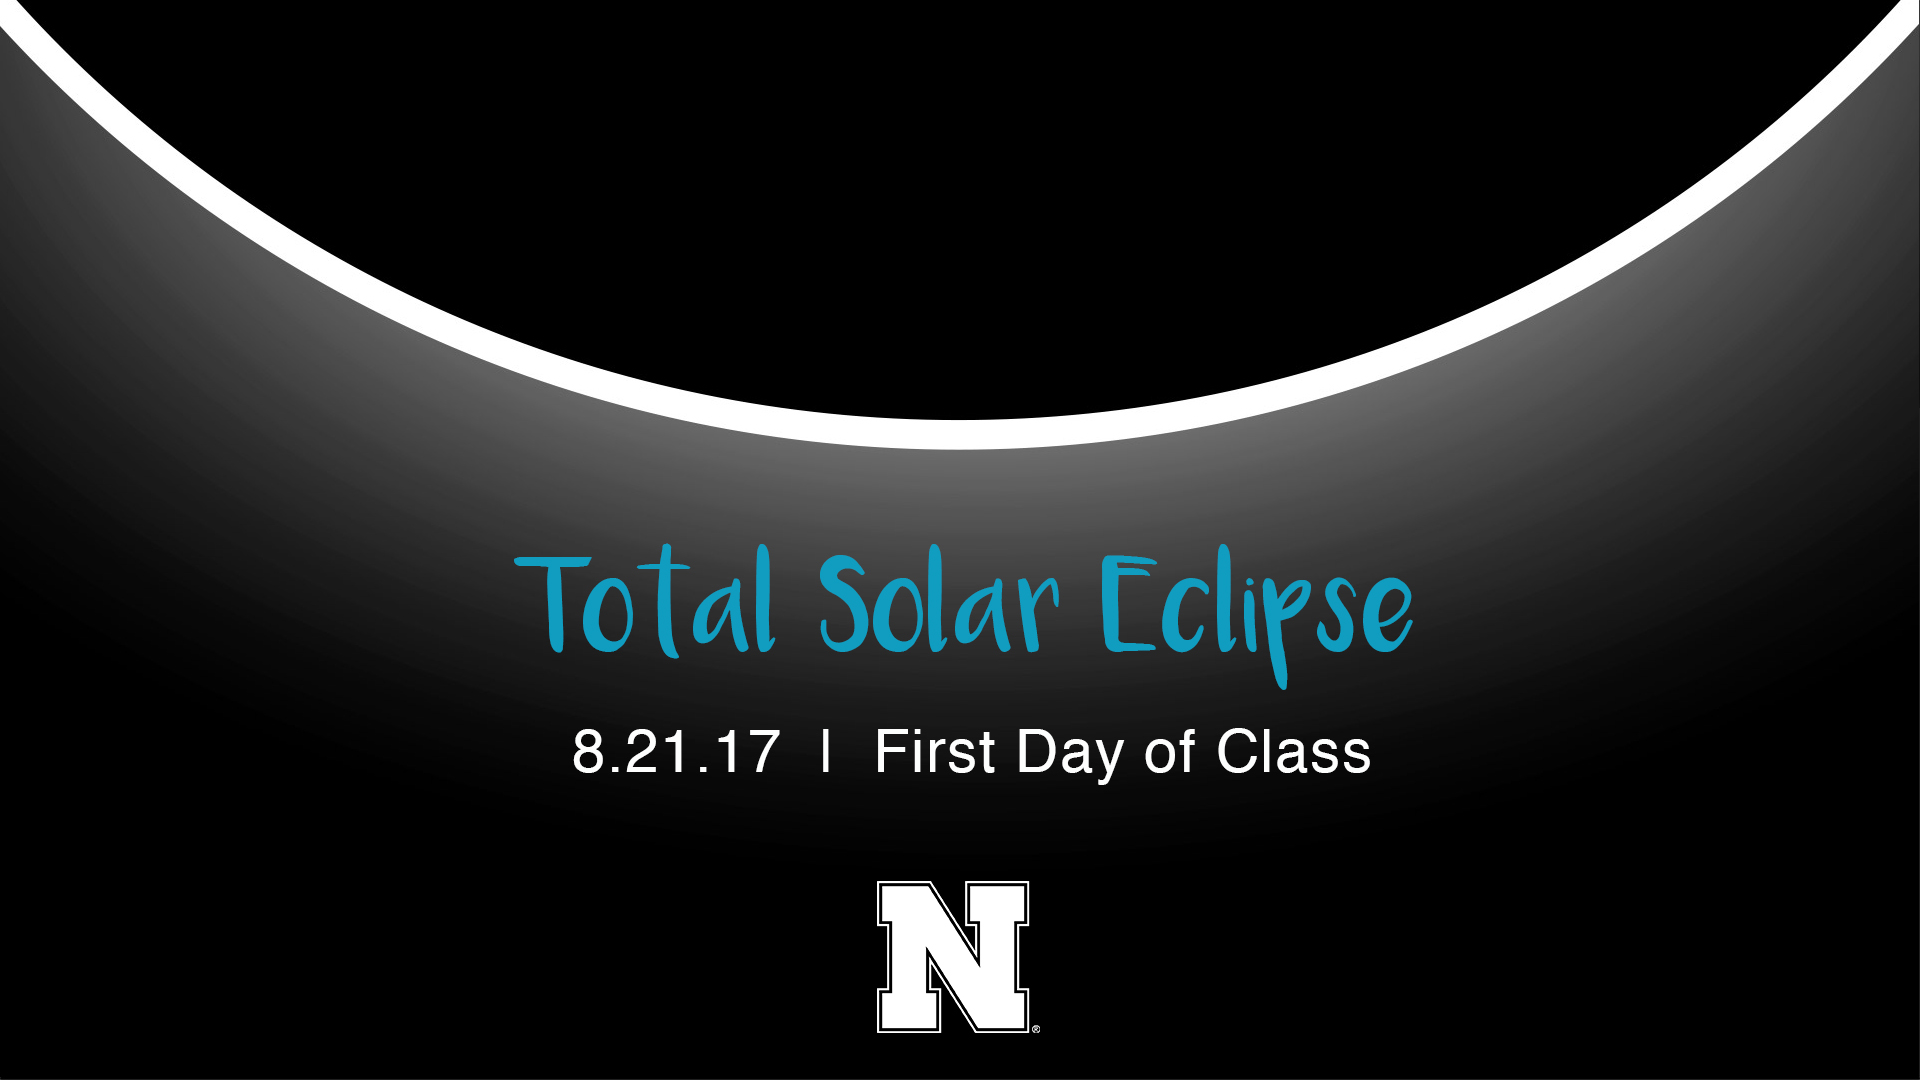 There's a total solar eclipse on the first day of classes.